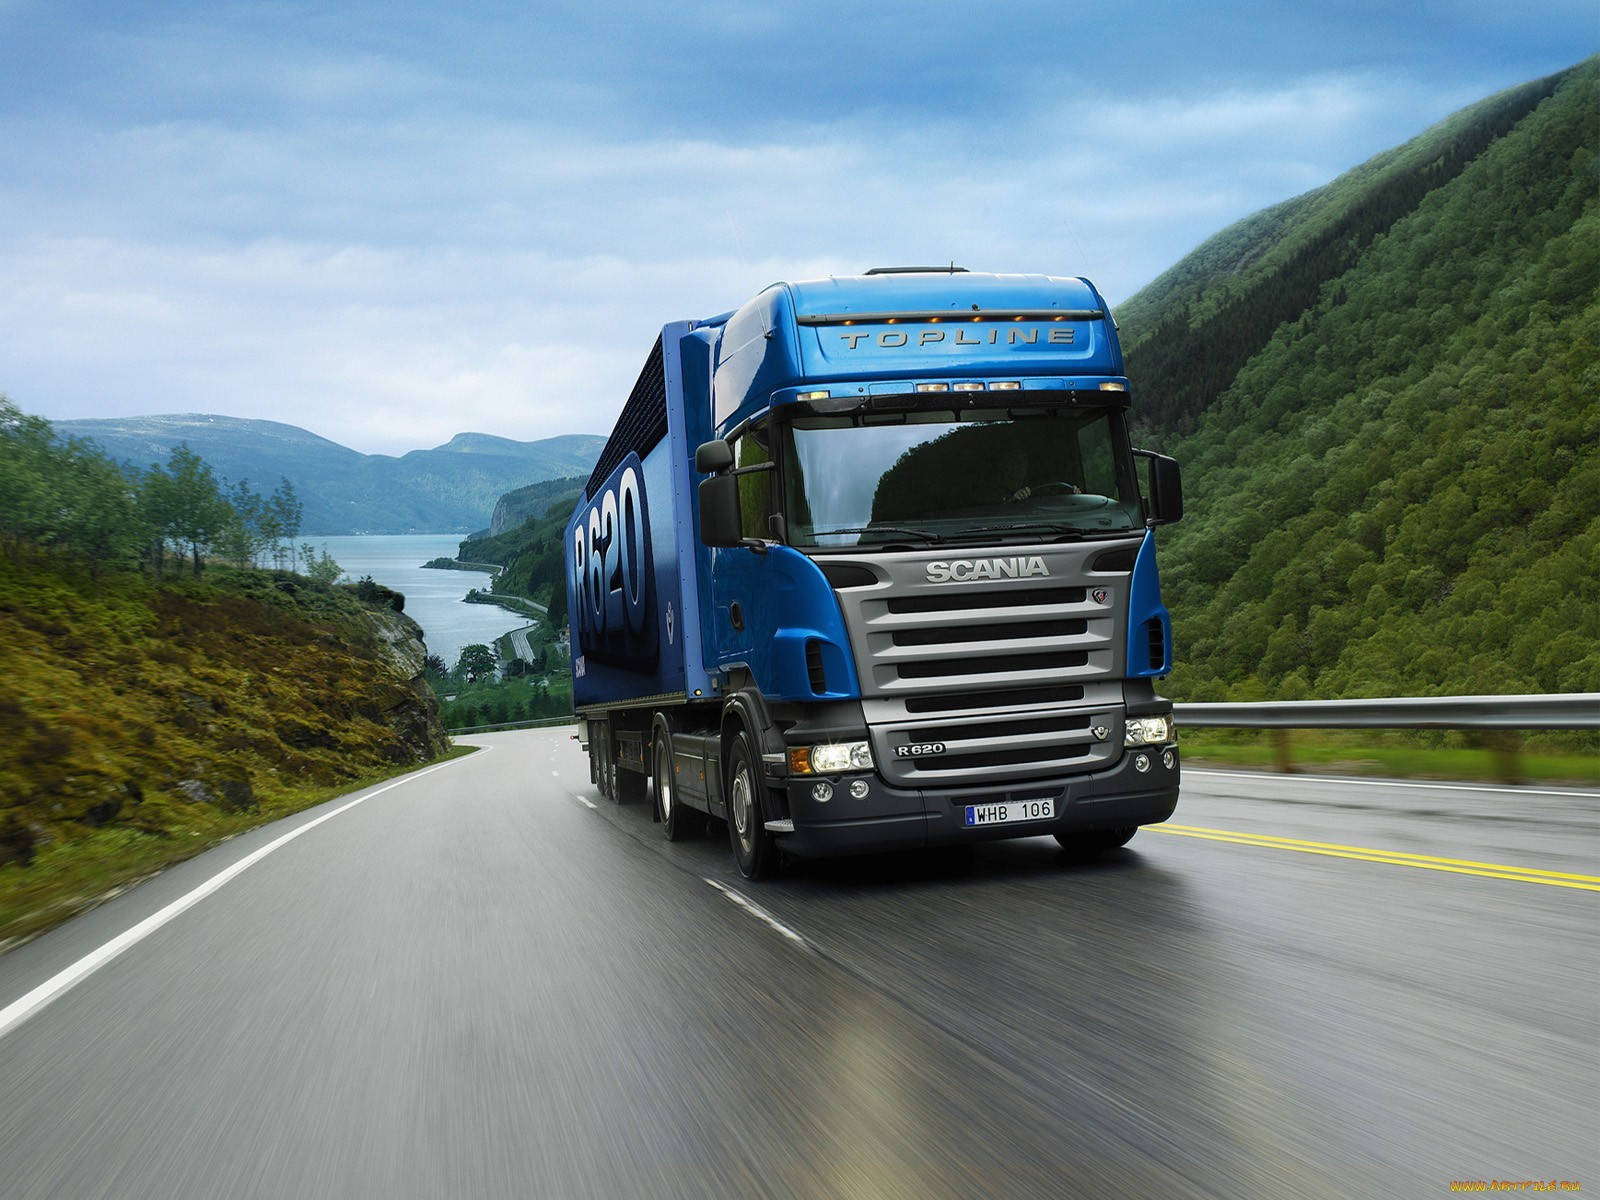 Blue Cool Truck On The Road Wallpaper